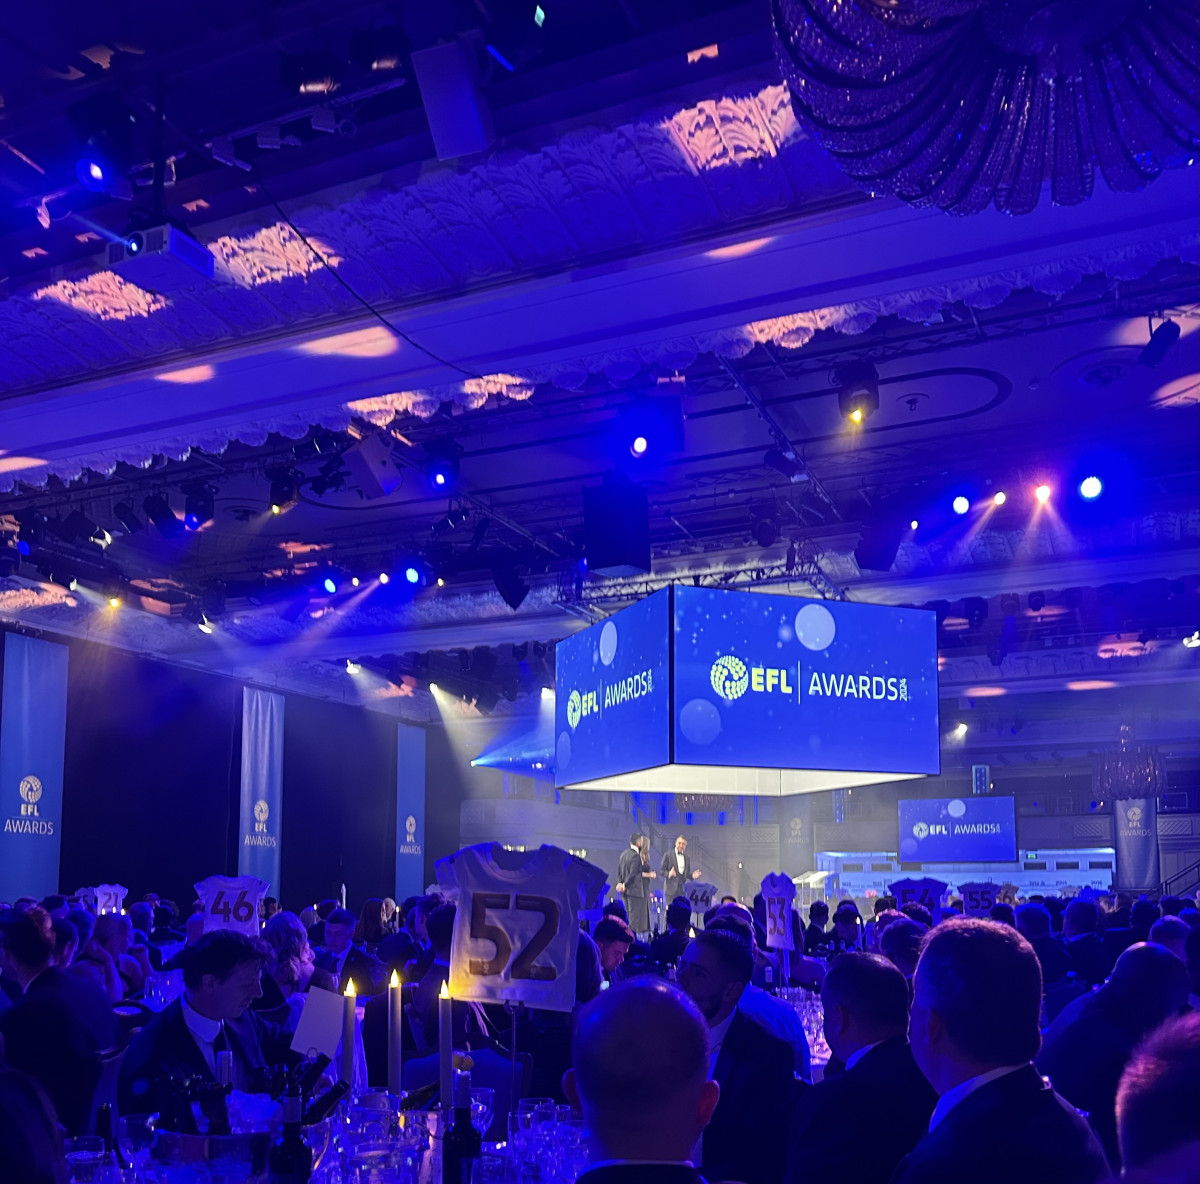 Millwall FC and Millwall Community Trust attended the EFL Awards on Sunday evening at the Grosvenor House Hotel